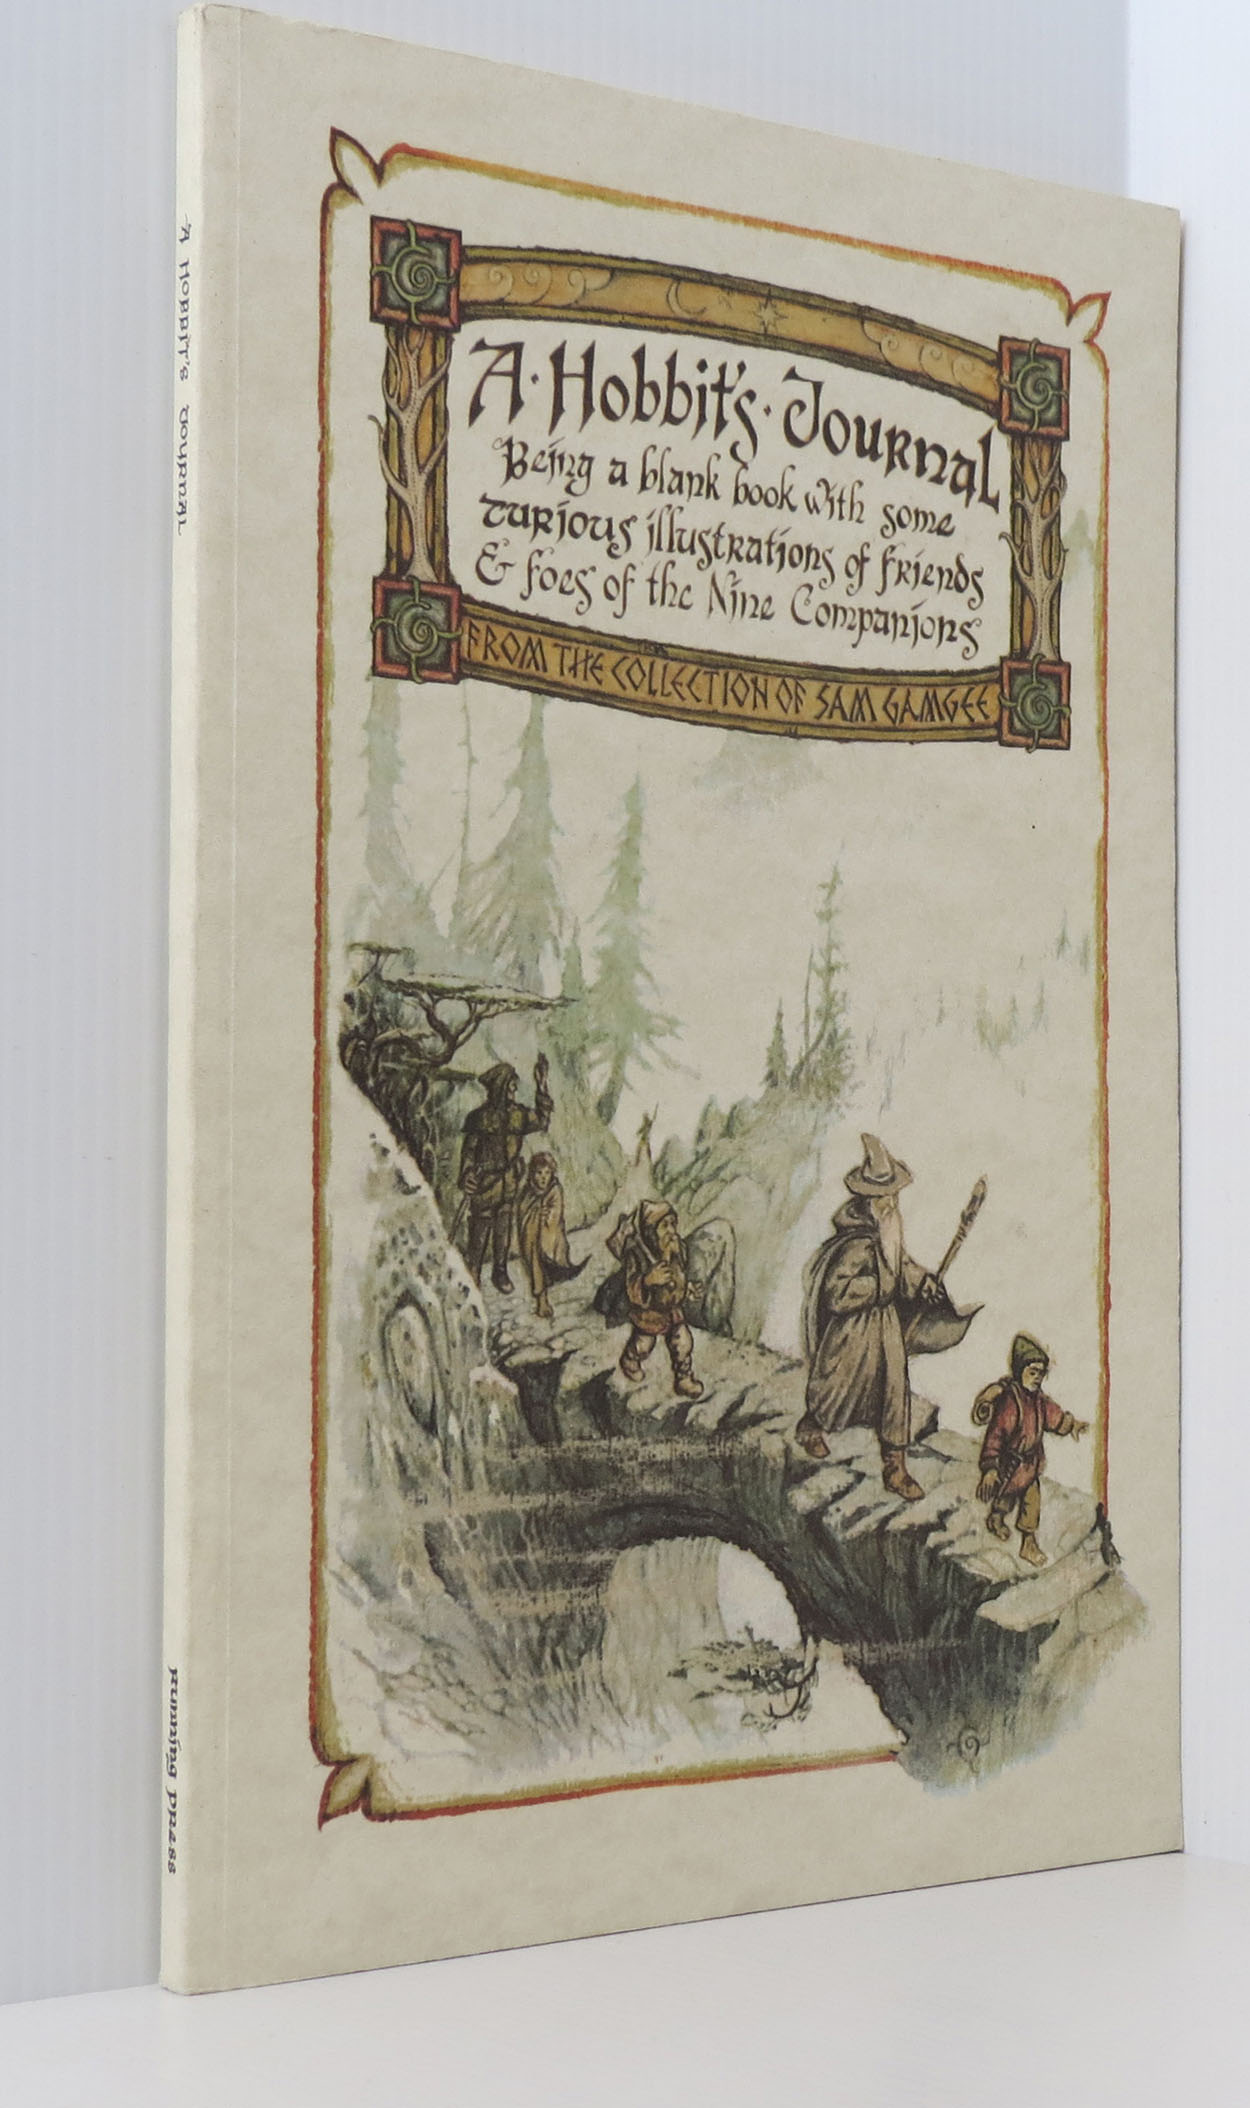 Hobbit's Journal: Being A Blank Book With Some Curious Illustrations Of Friends And Foes Of The Nine Companions [Book]